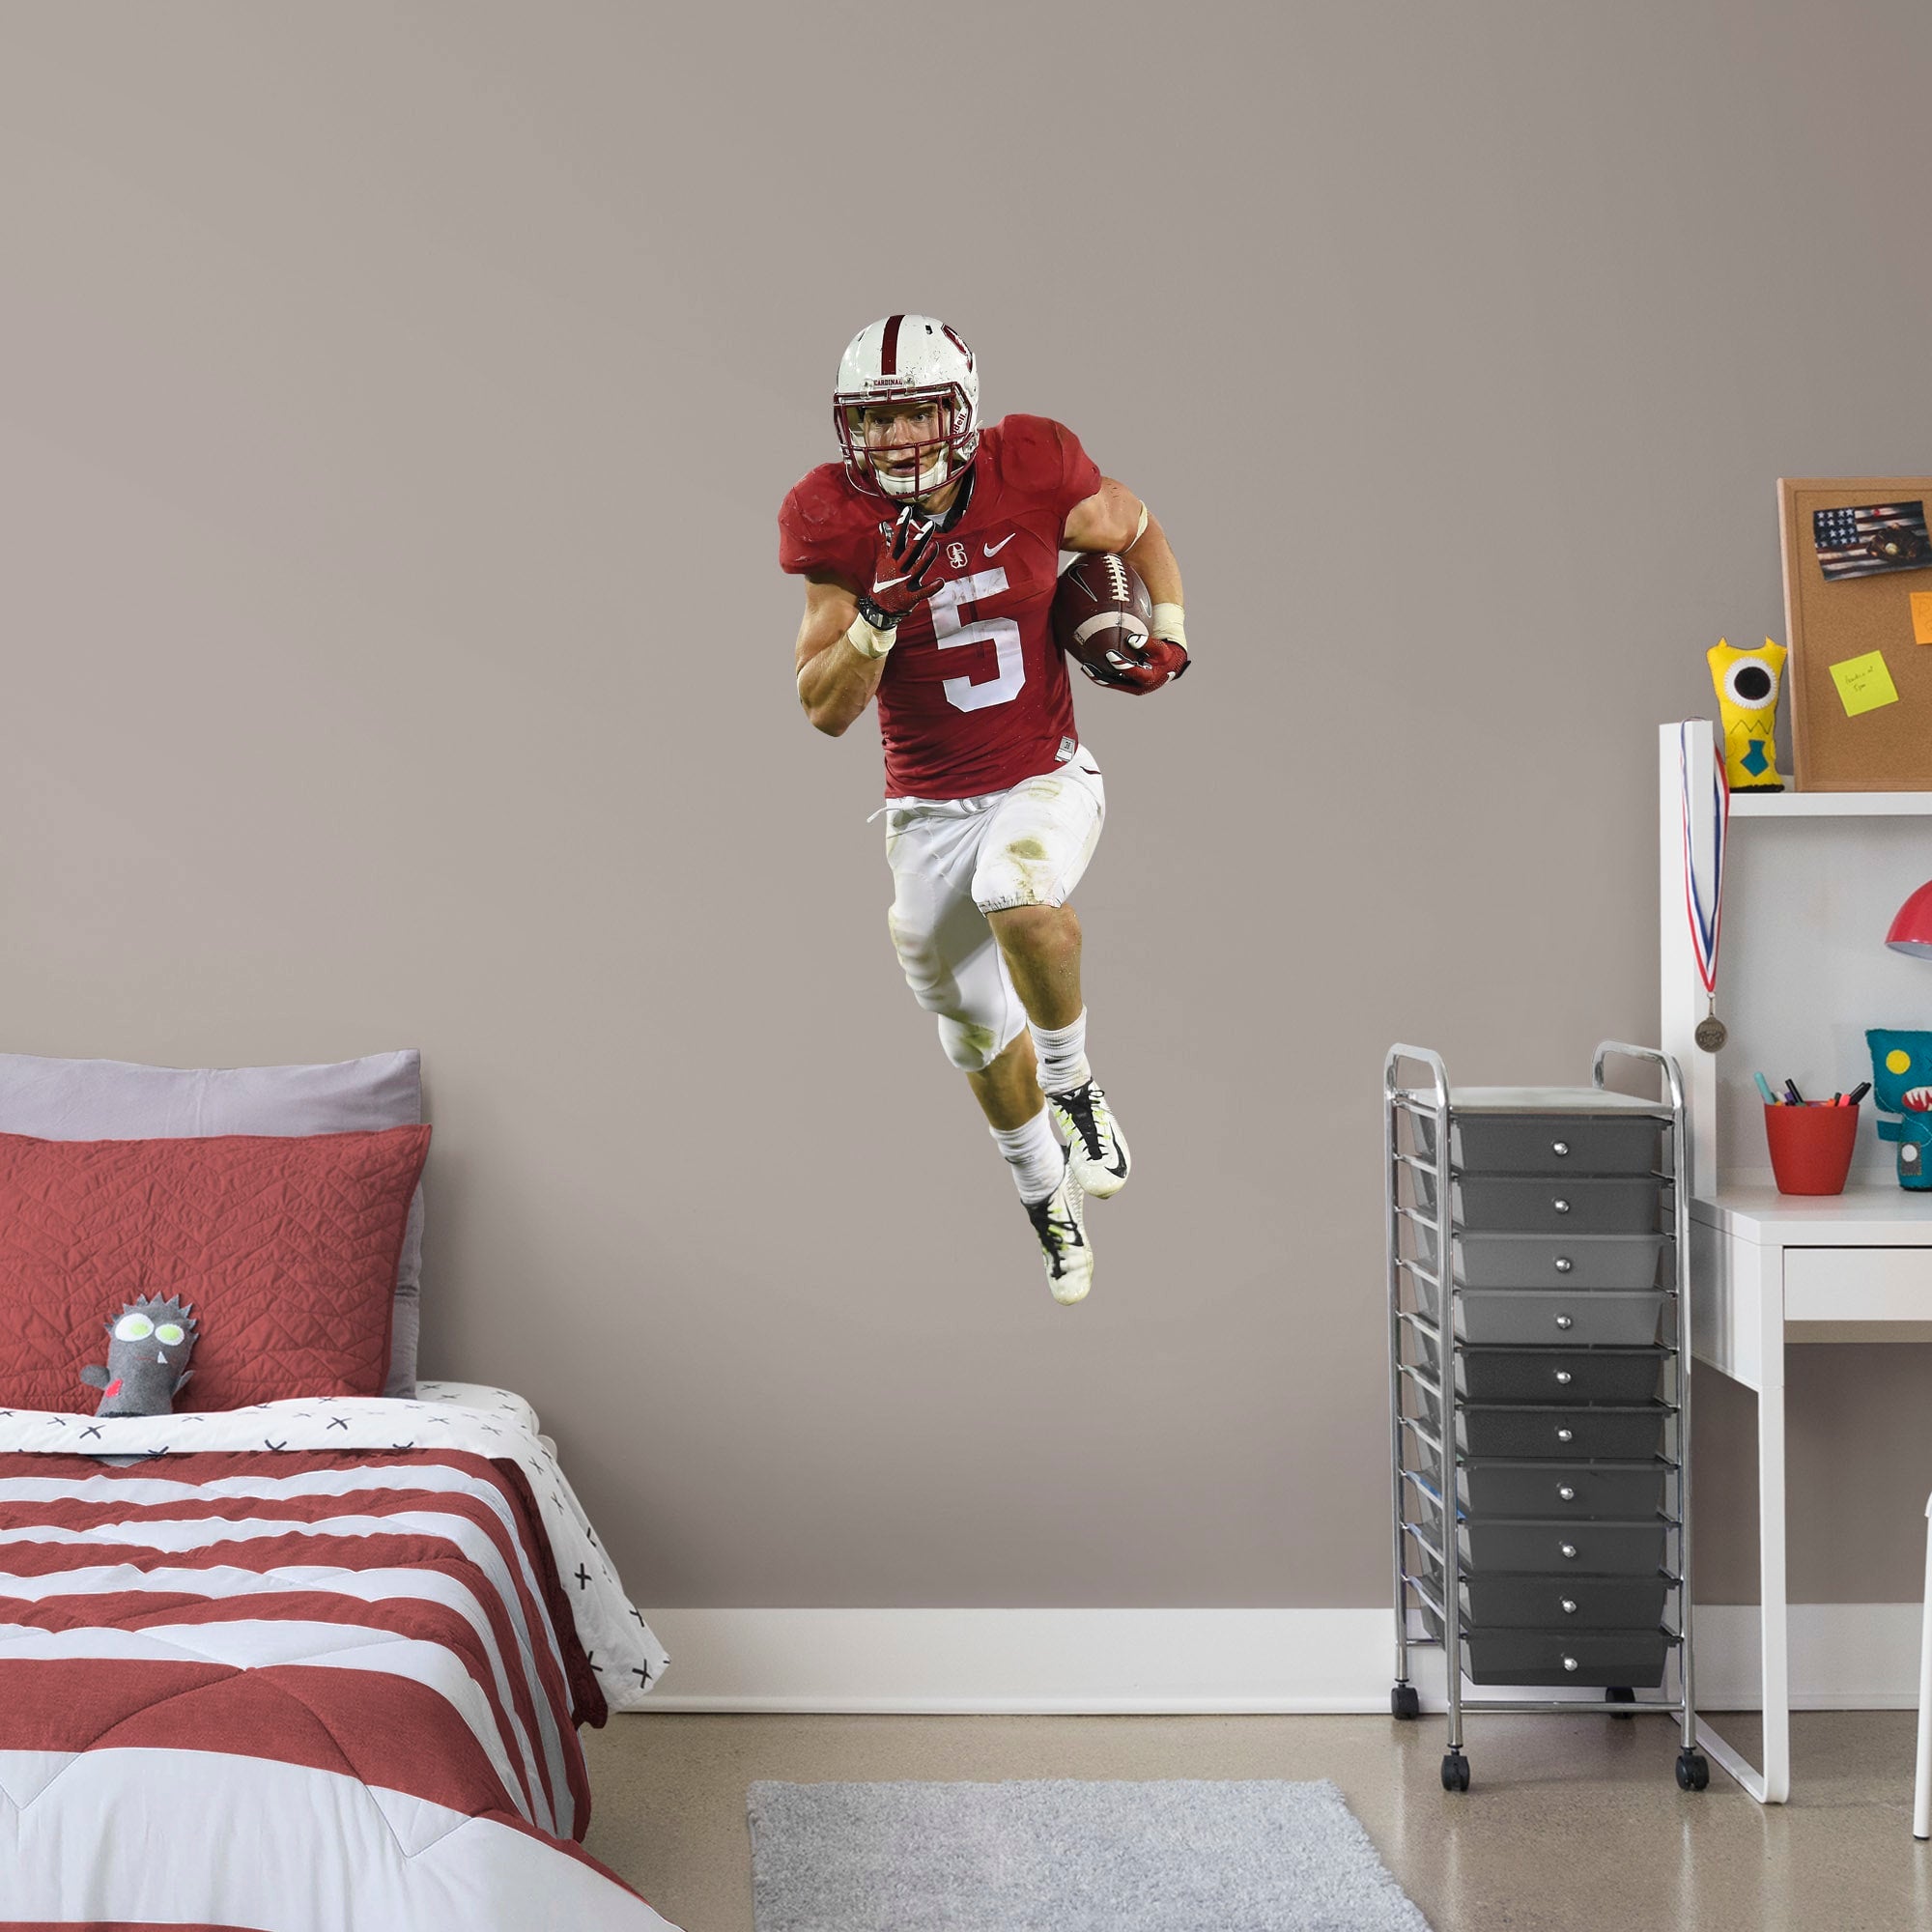 Christian McCaffrey for Stanford Cardinal: Stanford - Officially Licensed Removable Wall Decal Giant Athlete + 2 Decals (22"W x